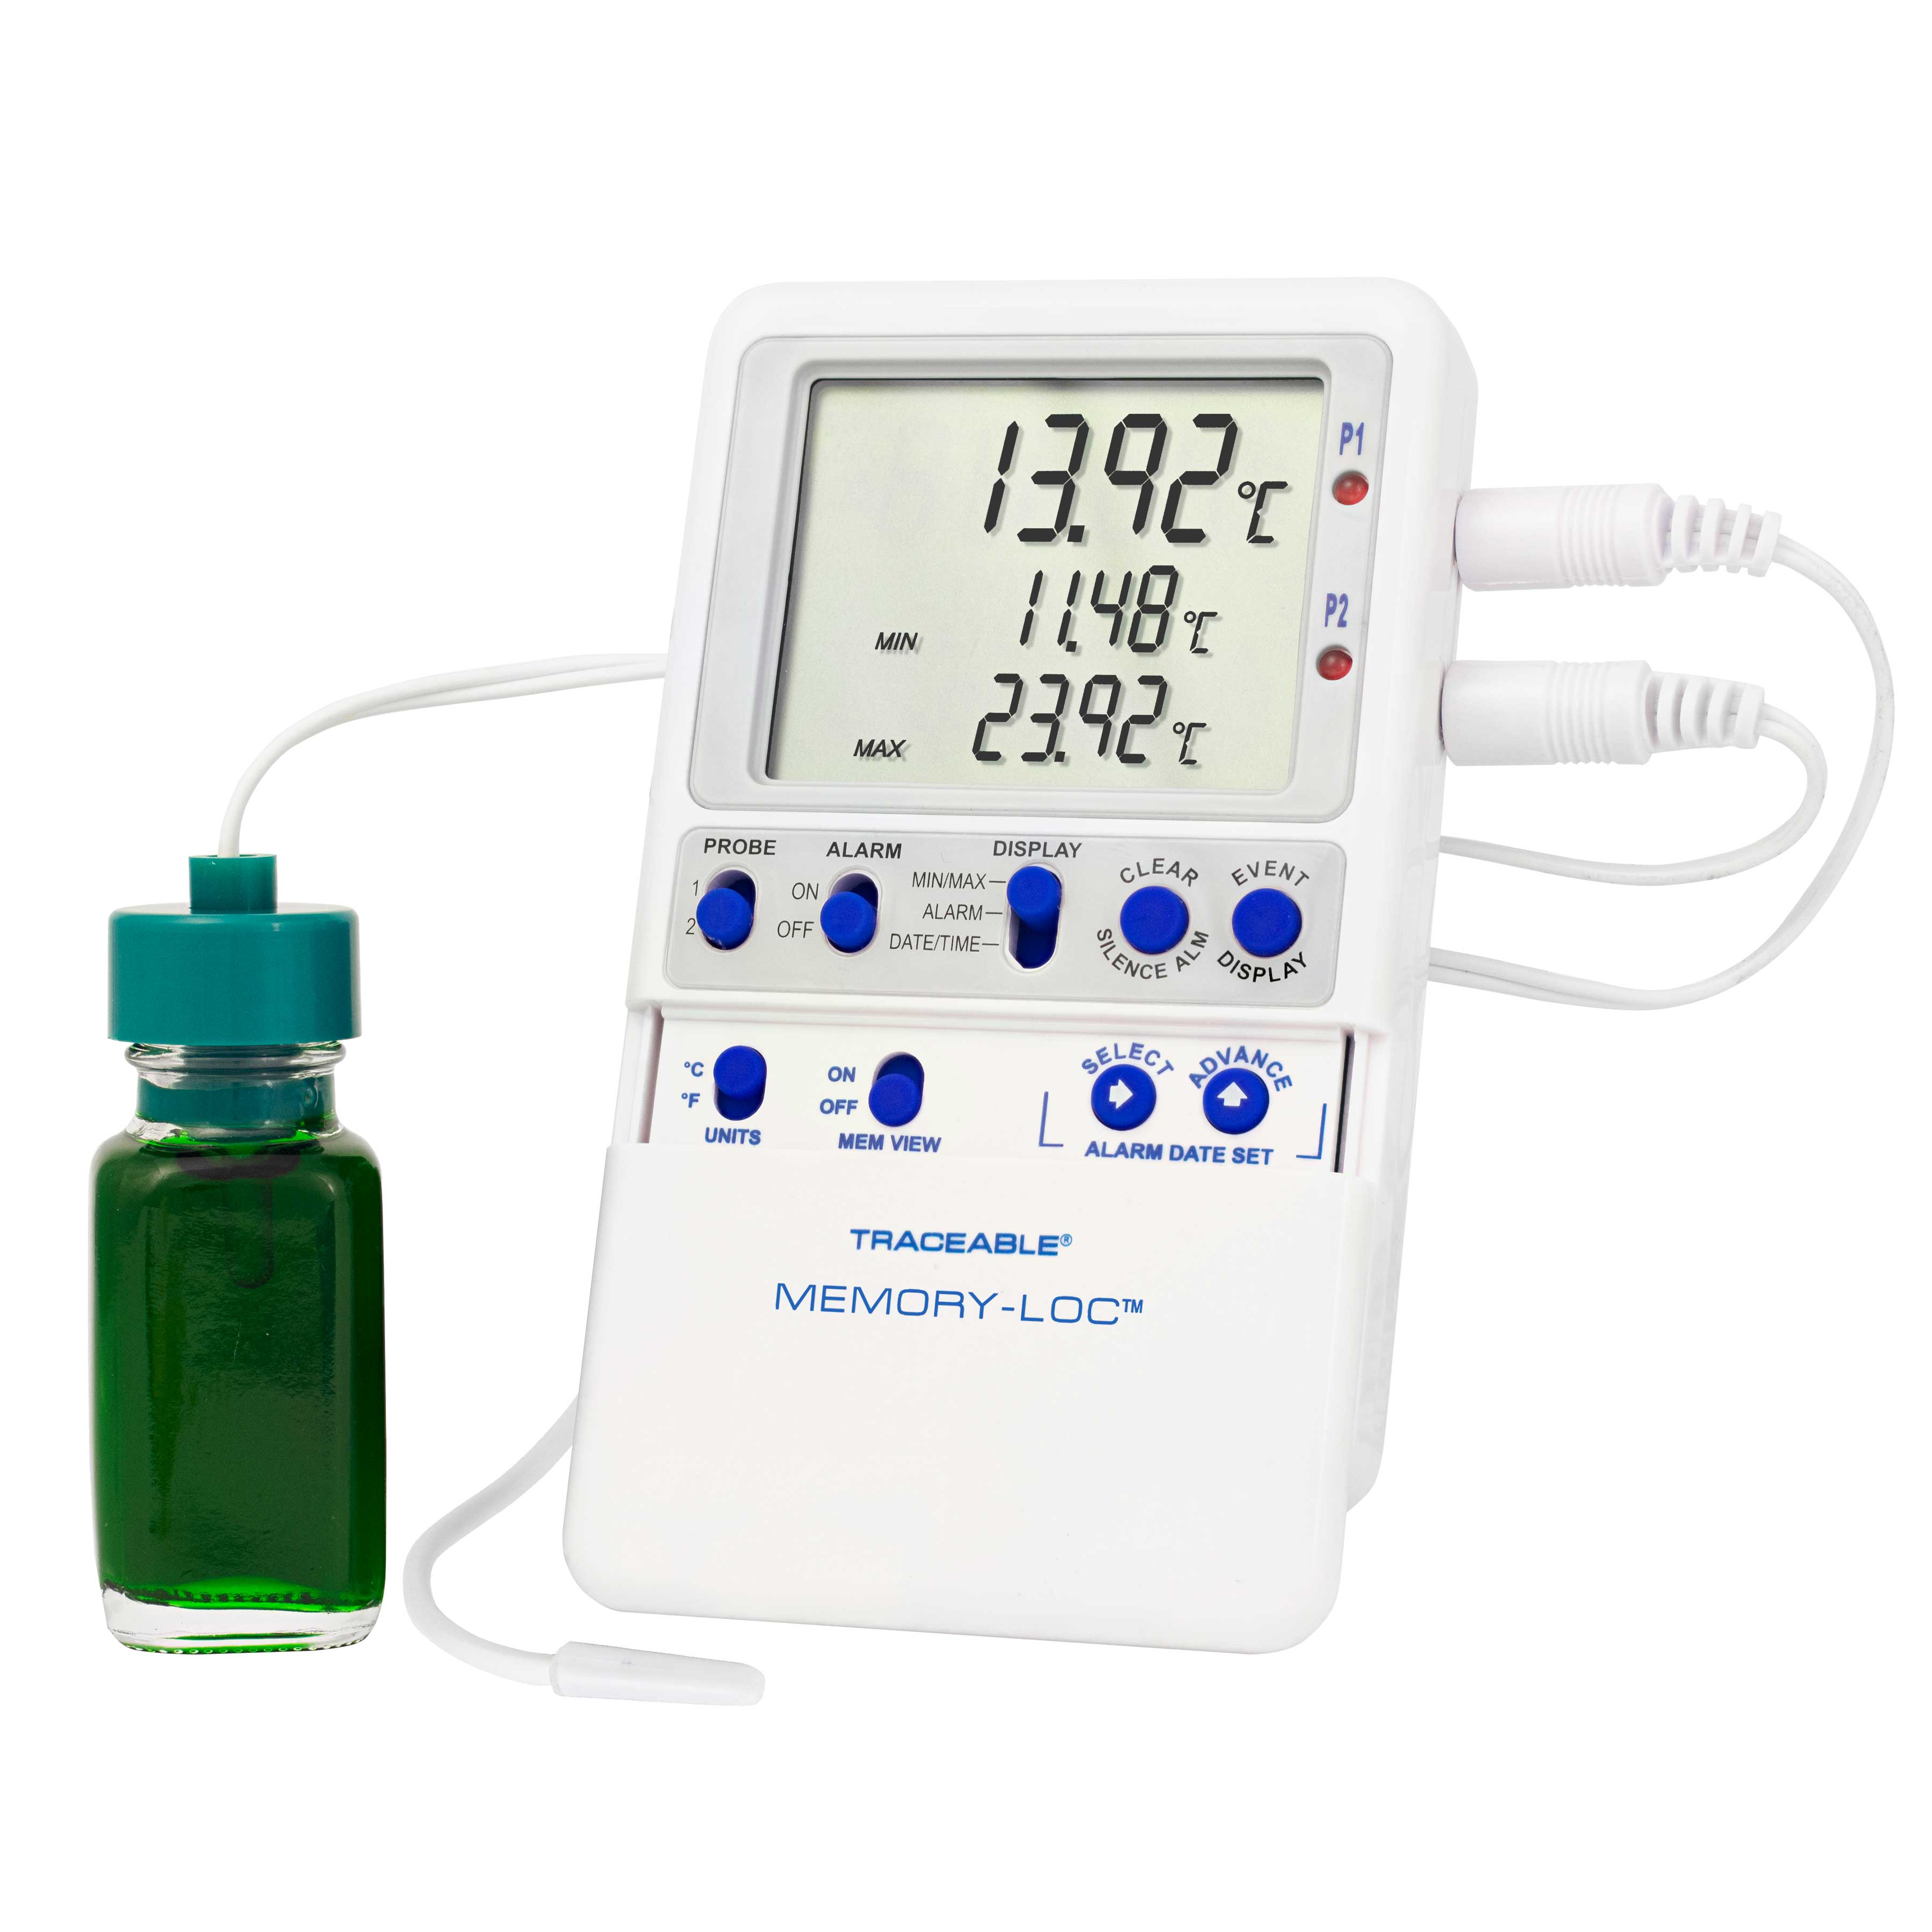 Memory-Loc datalogging digital thermometer. TRACEABLE. Range: –50.00 to 70.00°C. Accuracy: ±0.25°C. Resolution: 0.01°C. Probes: 1 bottle and 1 BulletTM probe. Application: Refrigerators and Freezers